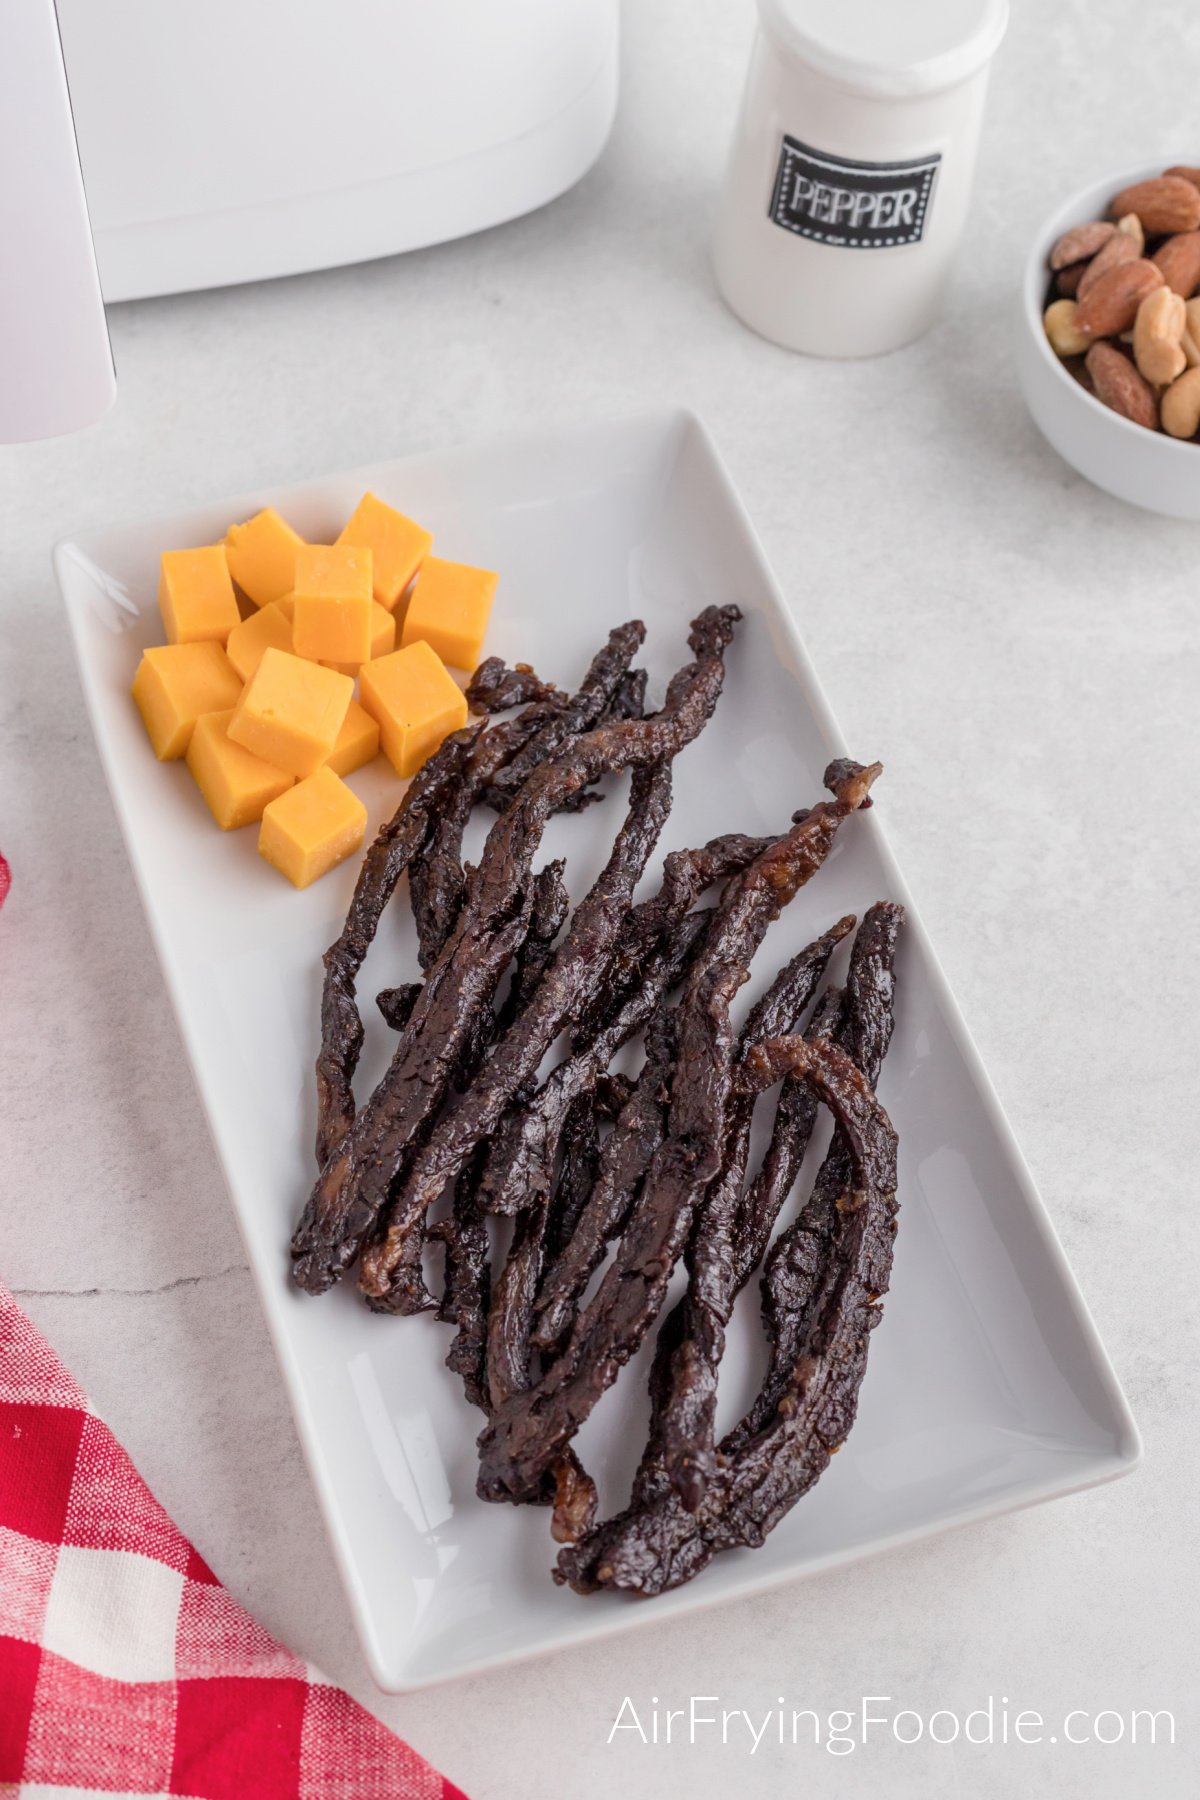 Strips of air fryer beef jerky on a plate with cheese. Ready to eat.